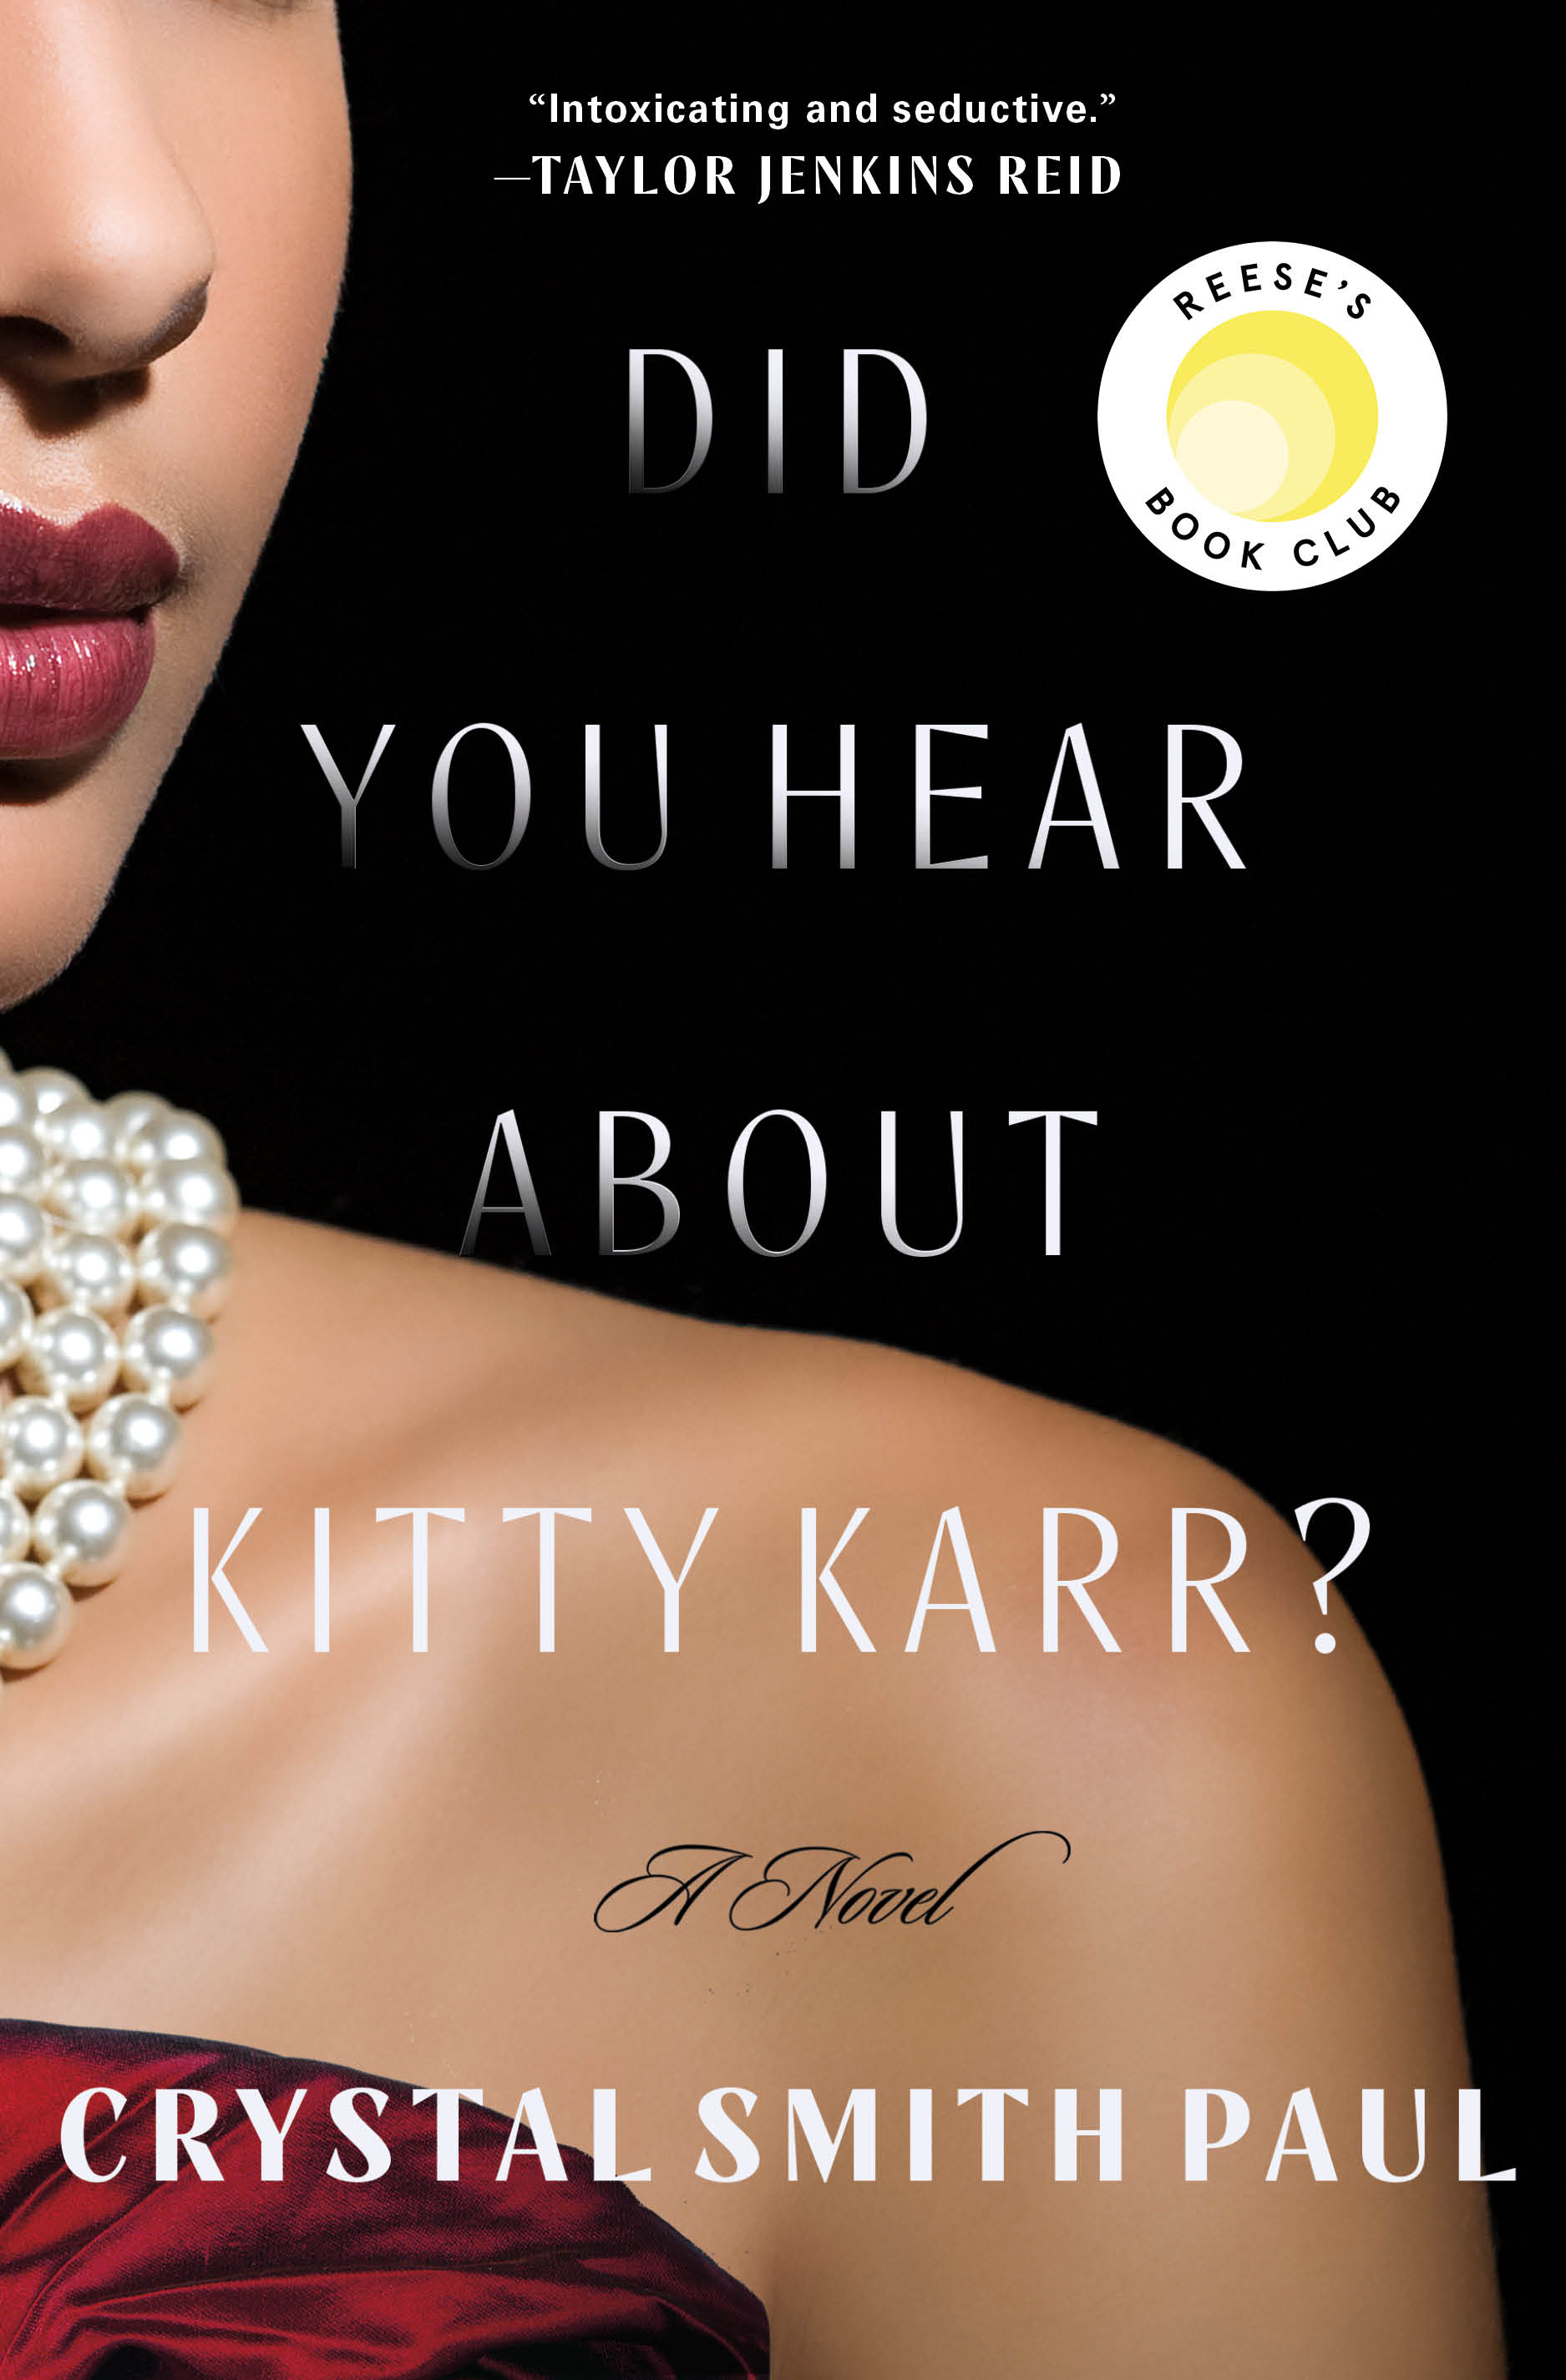 Image for "Did You Hear About Kitty Karr?"